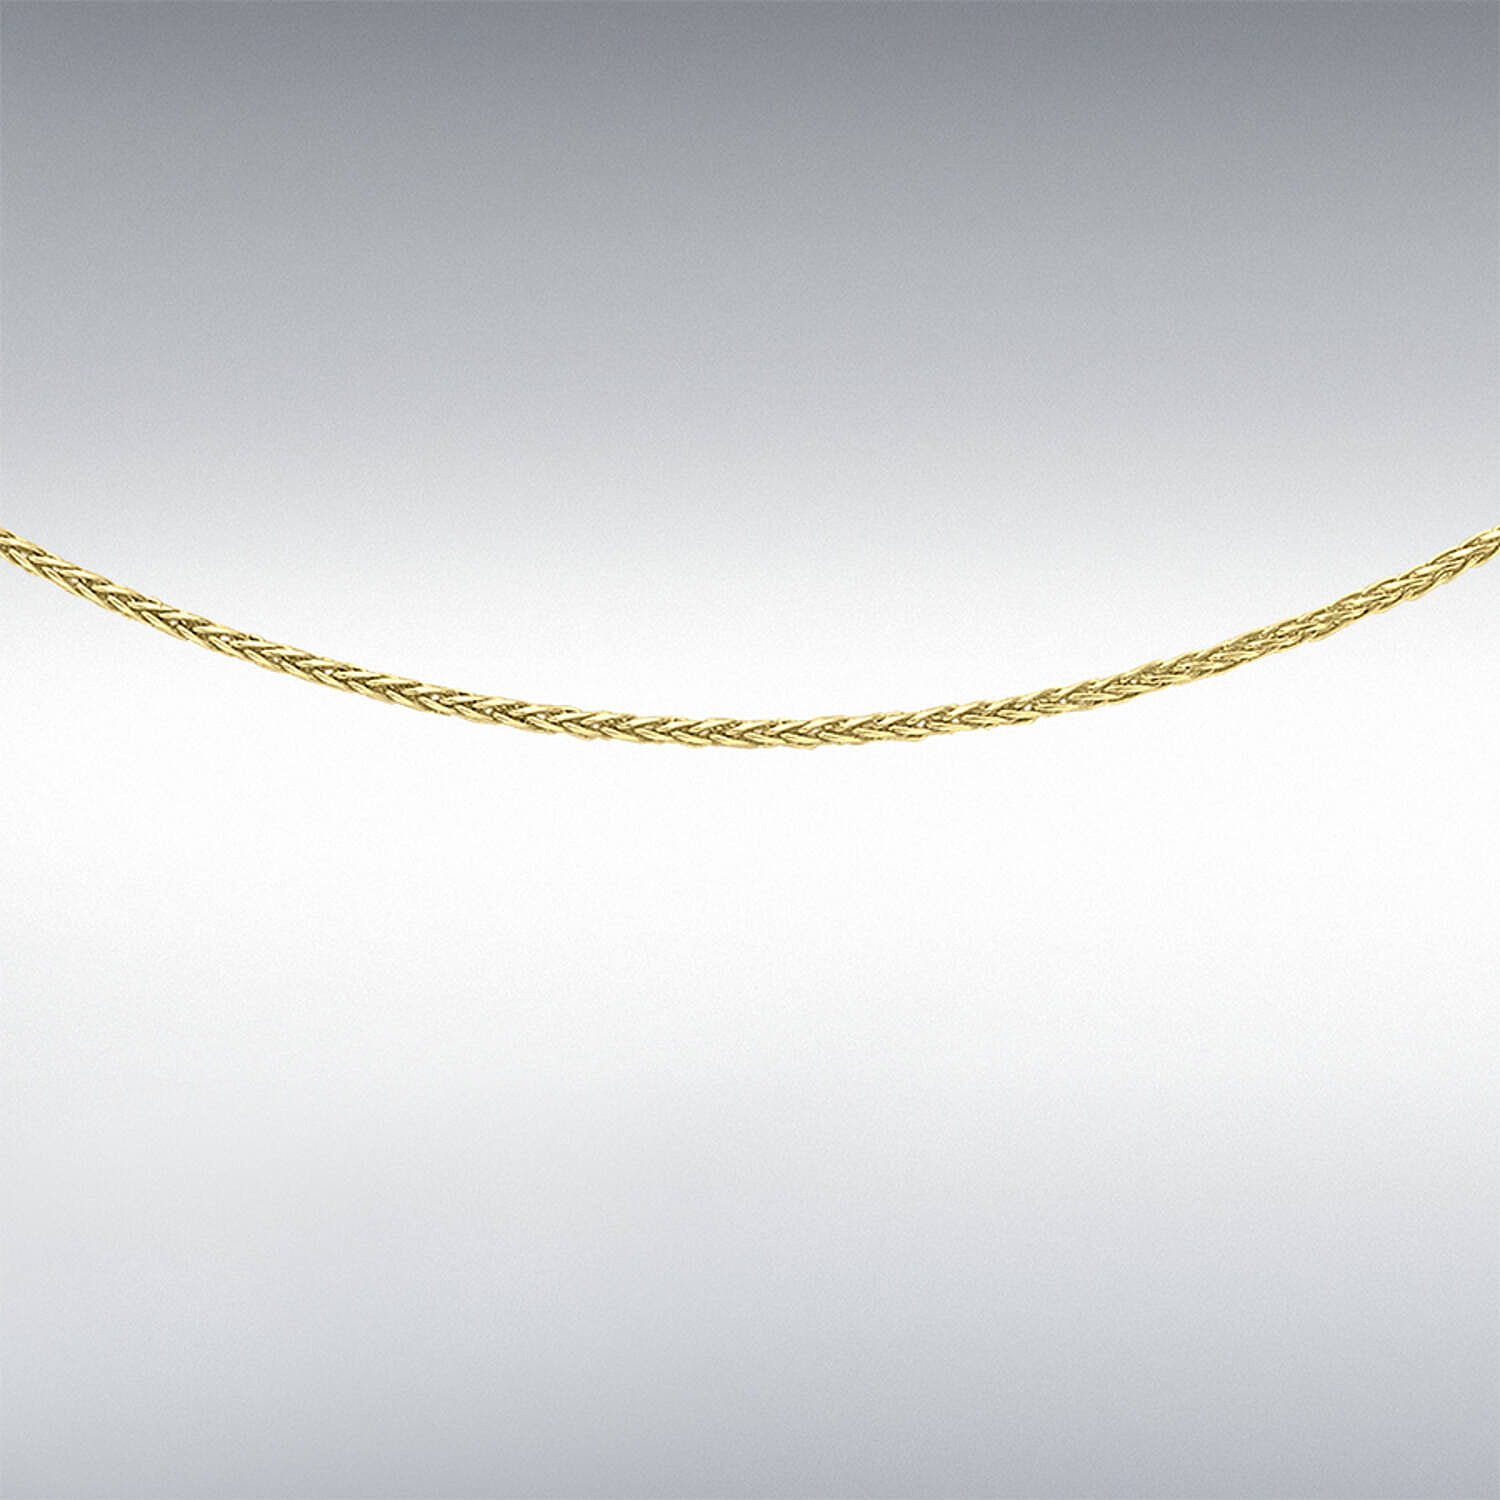 One Time Closeout -- 9K Yellow Gold SPIGA Necklace (Size - 18)